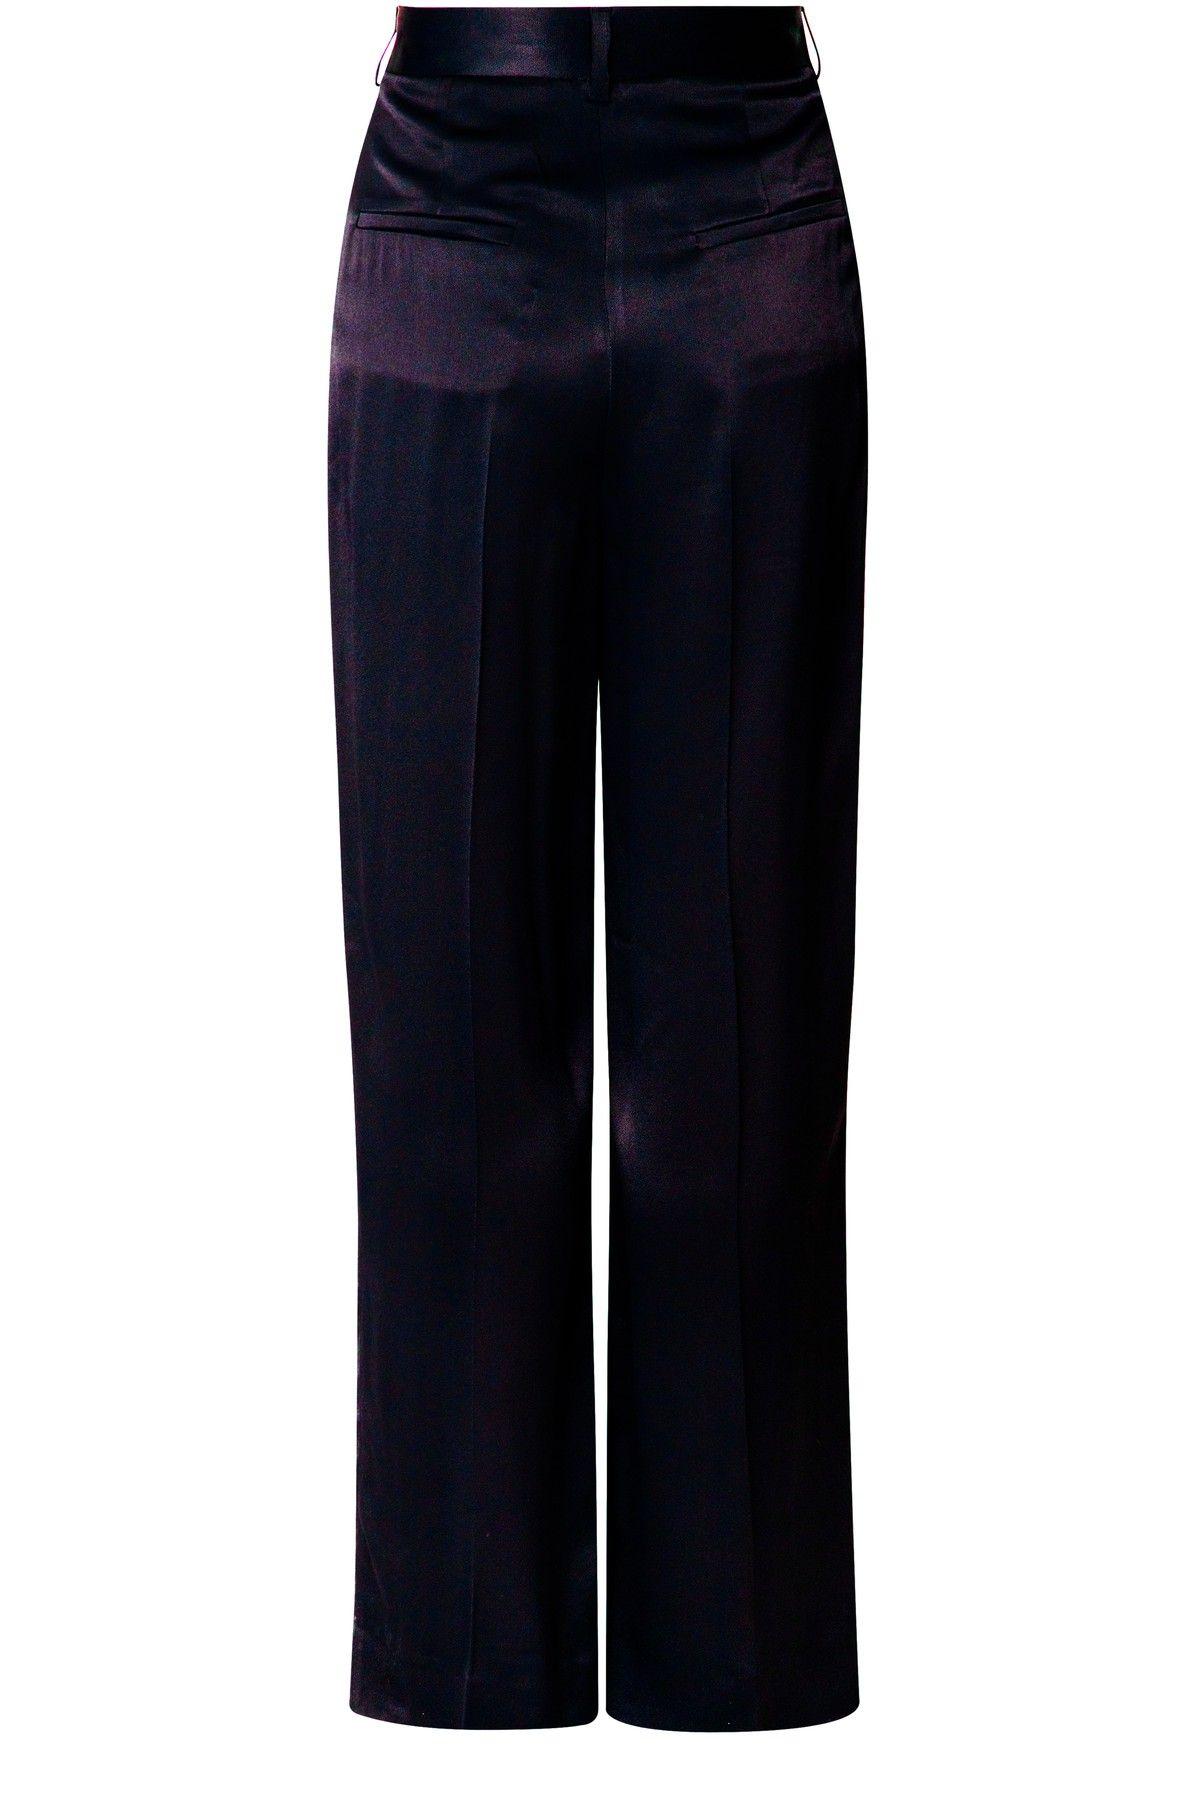 House of Dagmar Valentina Trousers in Blue | Lyst